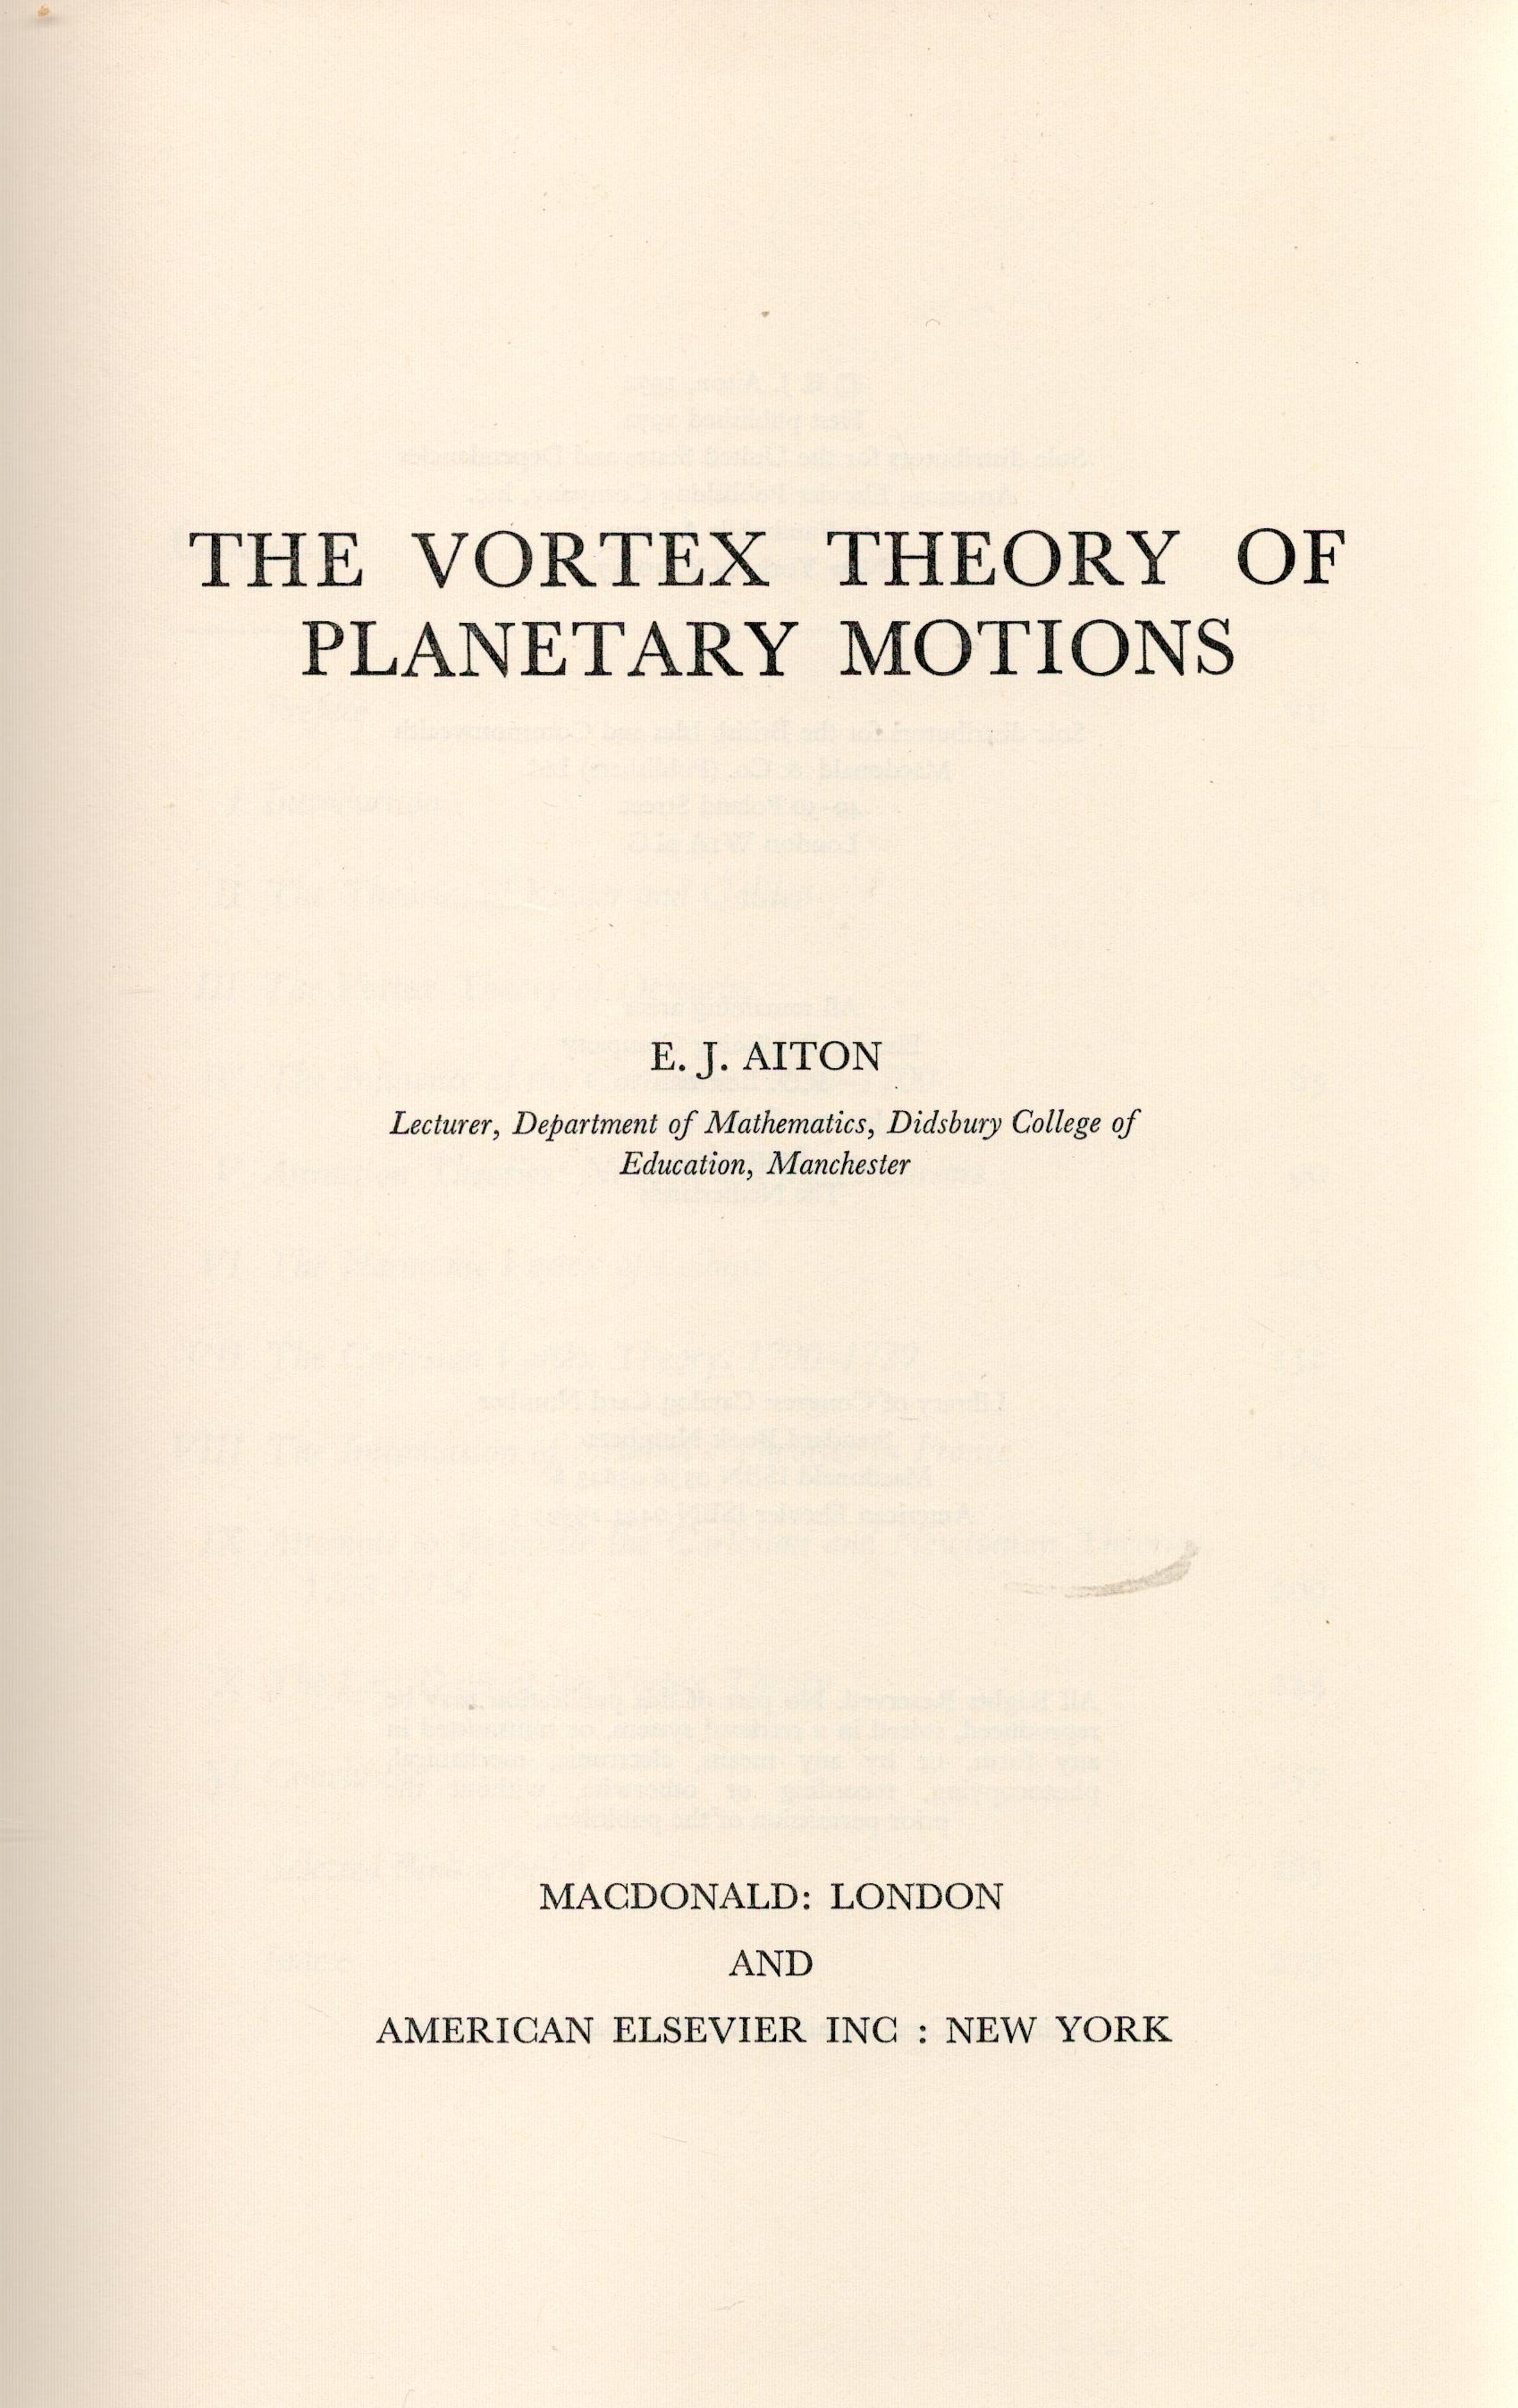 The Vortex Theory of Planetary Motions by E J Aiton Hardback Book 1972 First Edition published by - Image 2 of 3